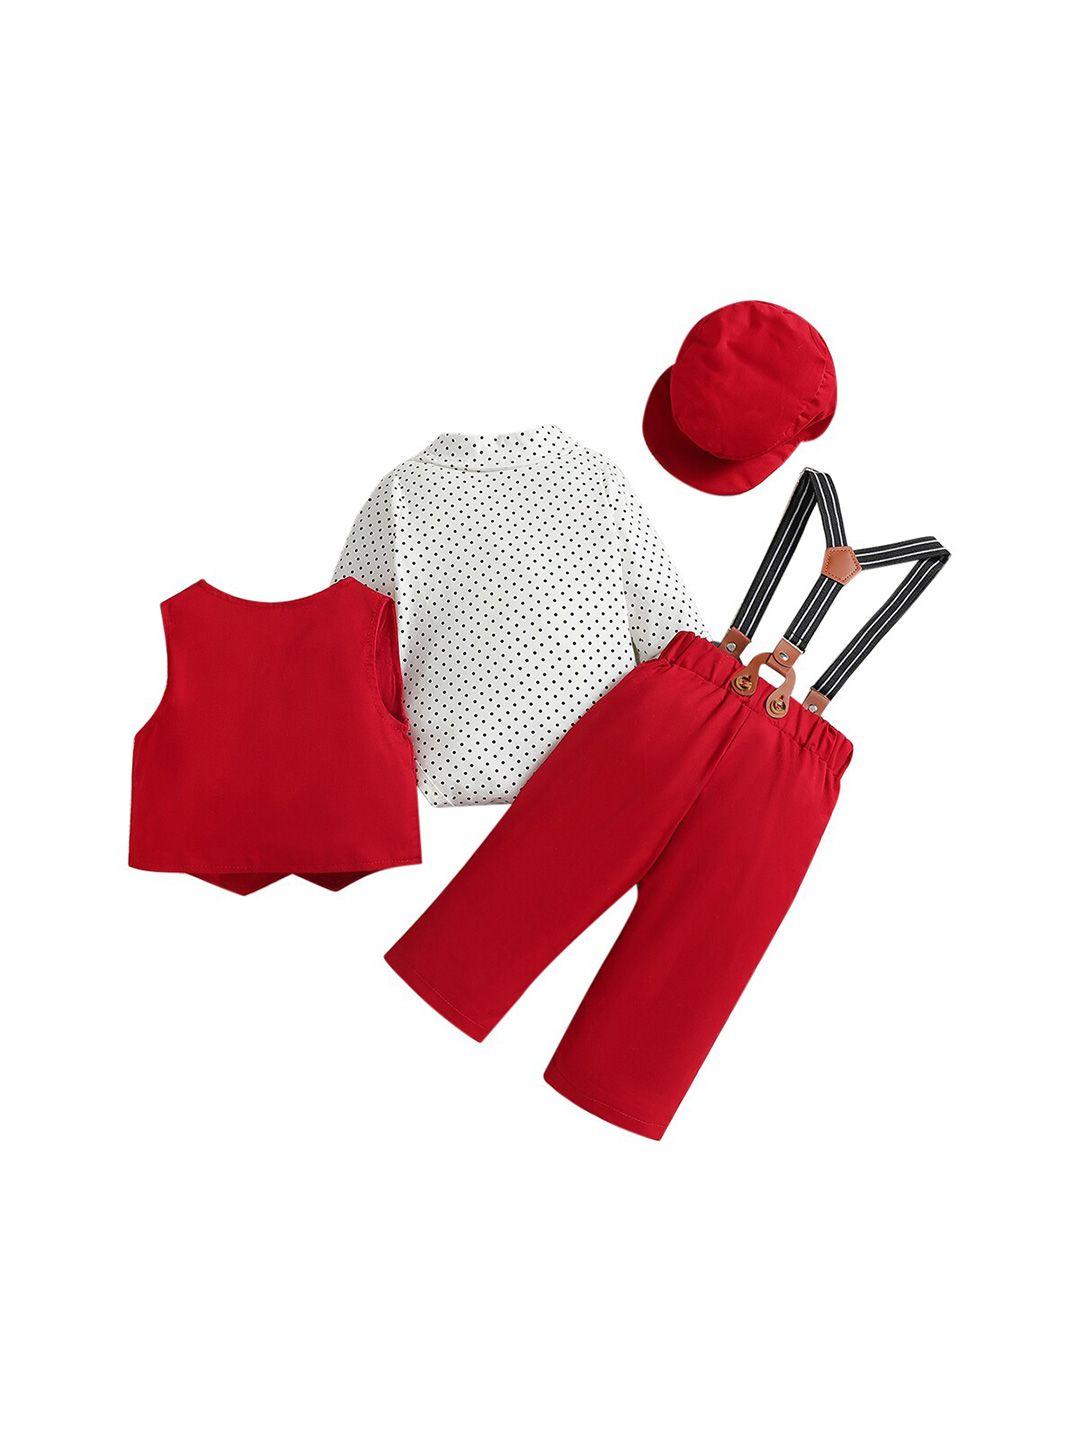 stylecast boys red & white 5 piece suit